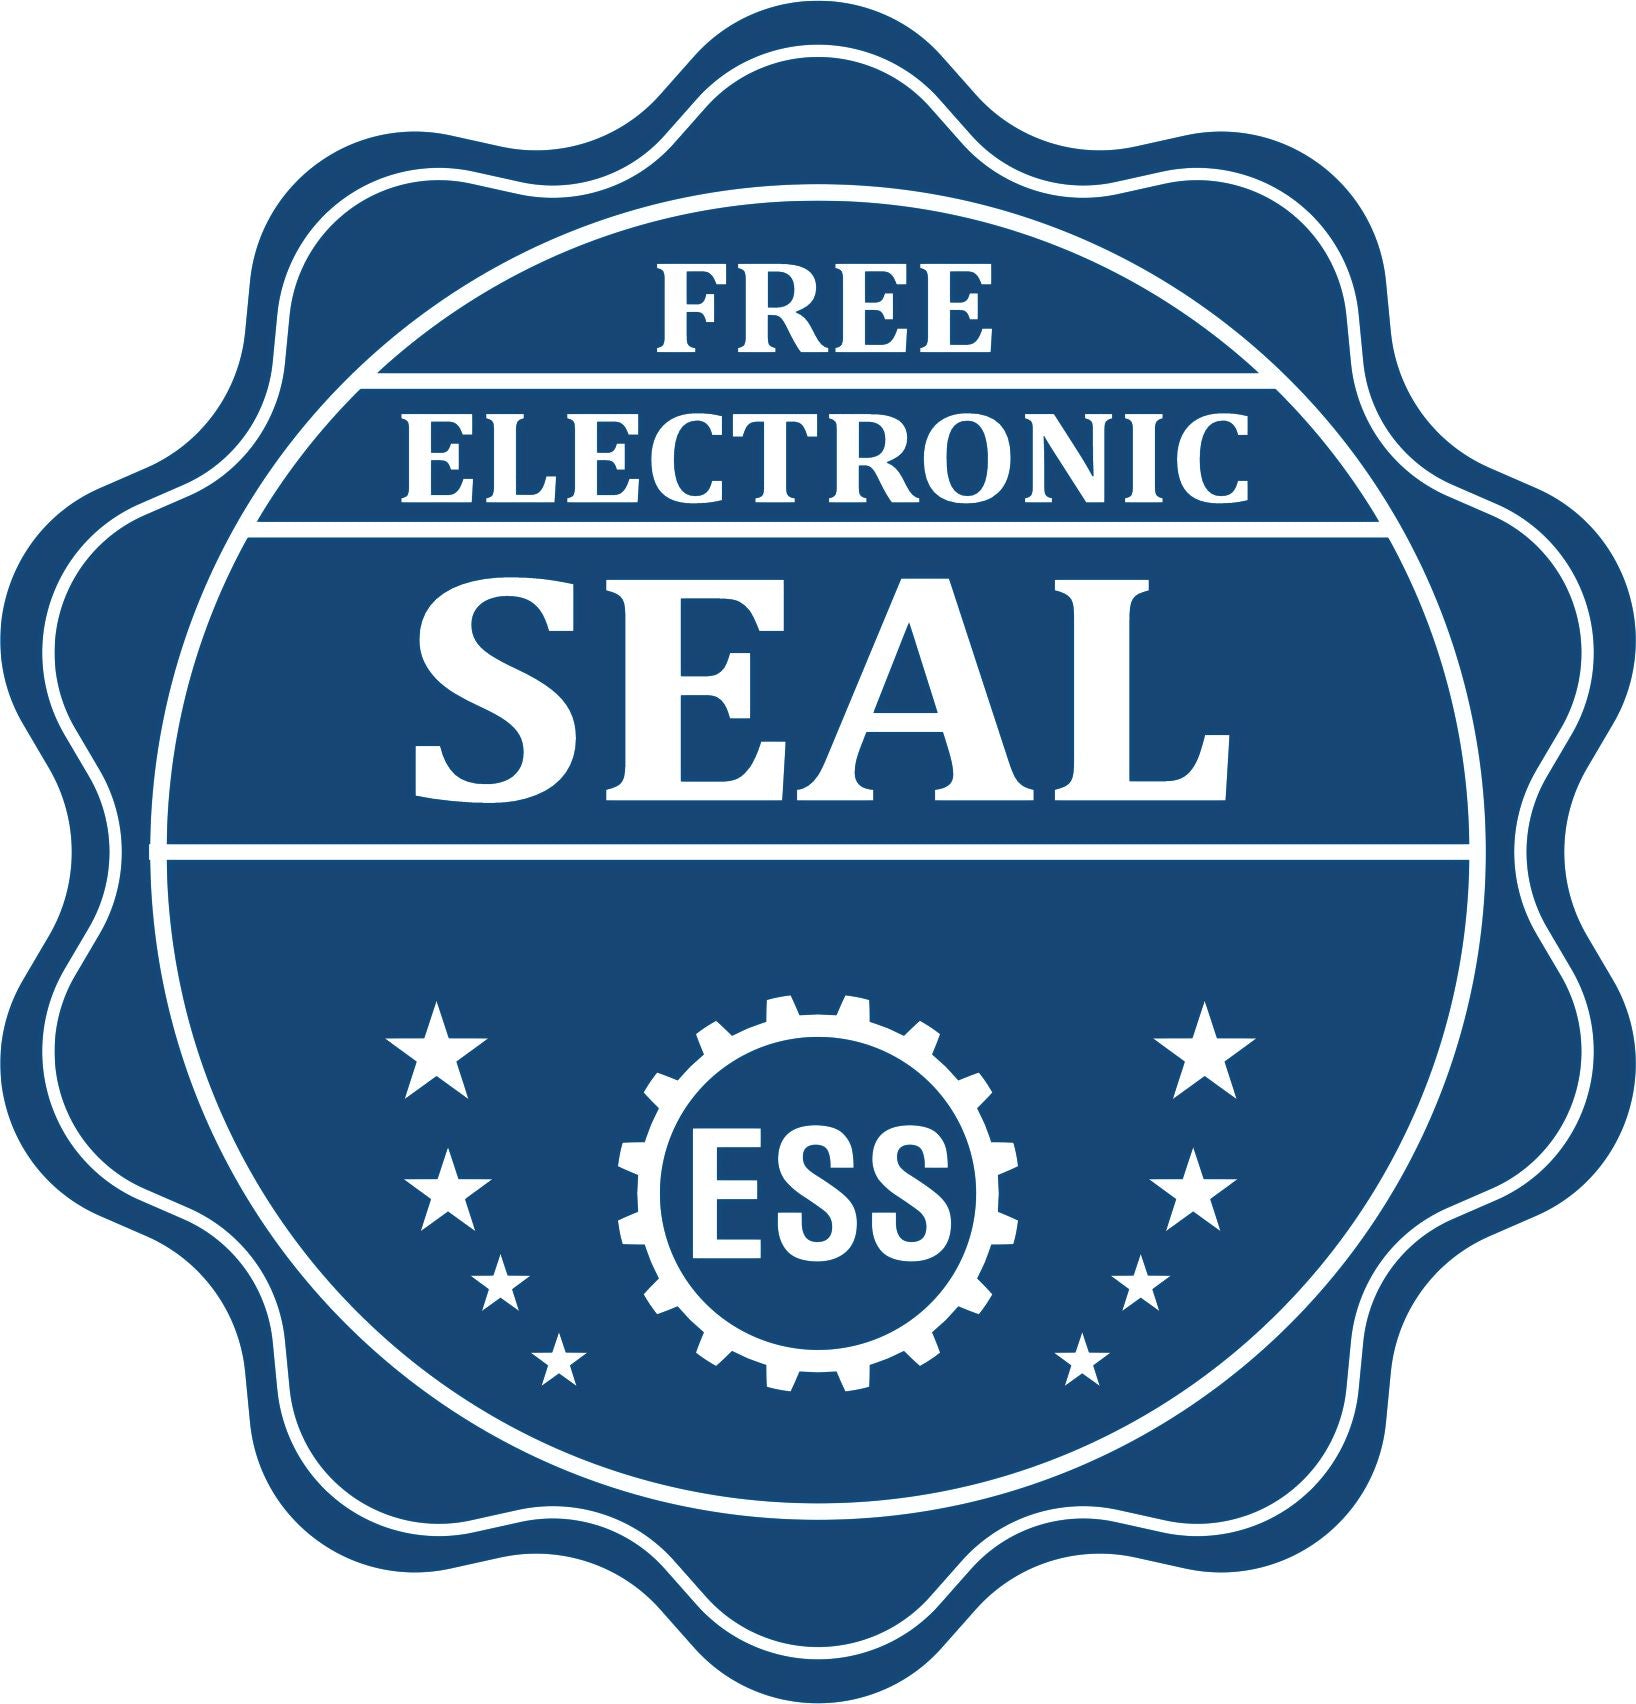 A badge showing a free electronic seal for the Heavy Duty Cast Iron Vermont Architect Embosser with stars and the ESS gear on the emblem.